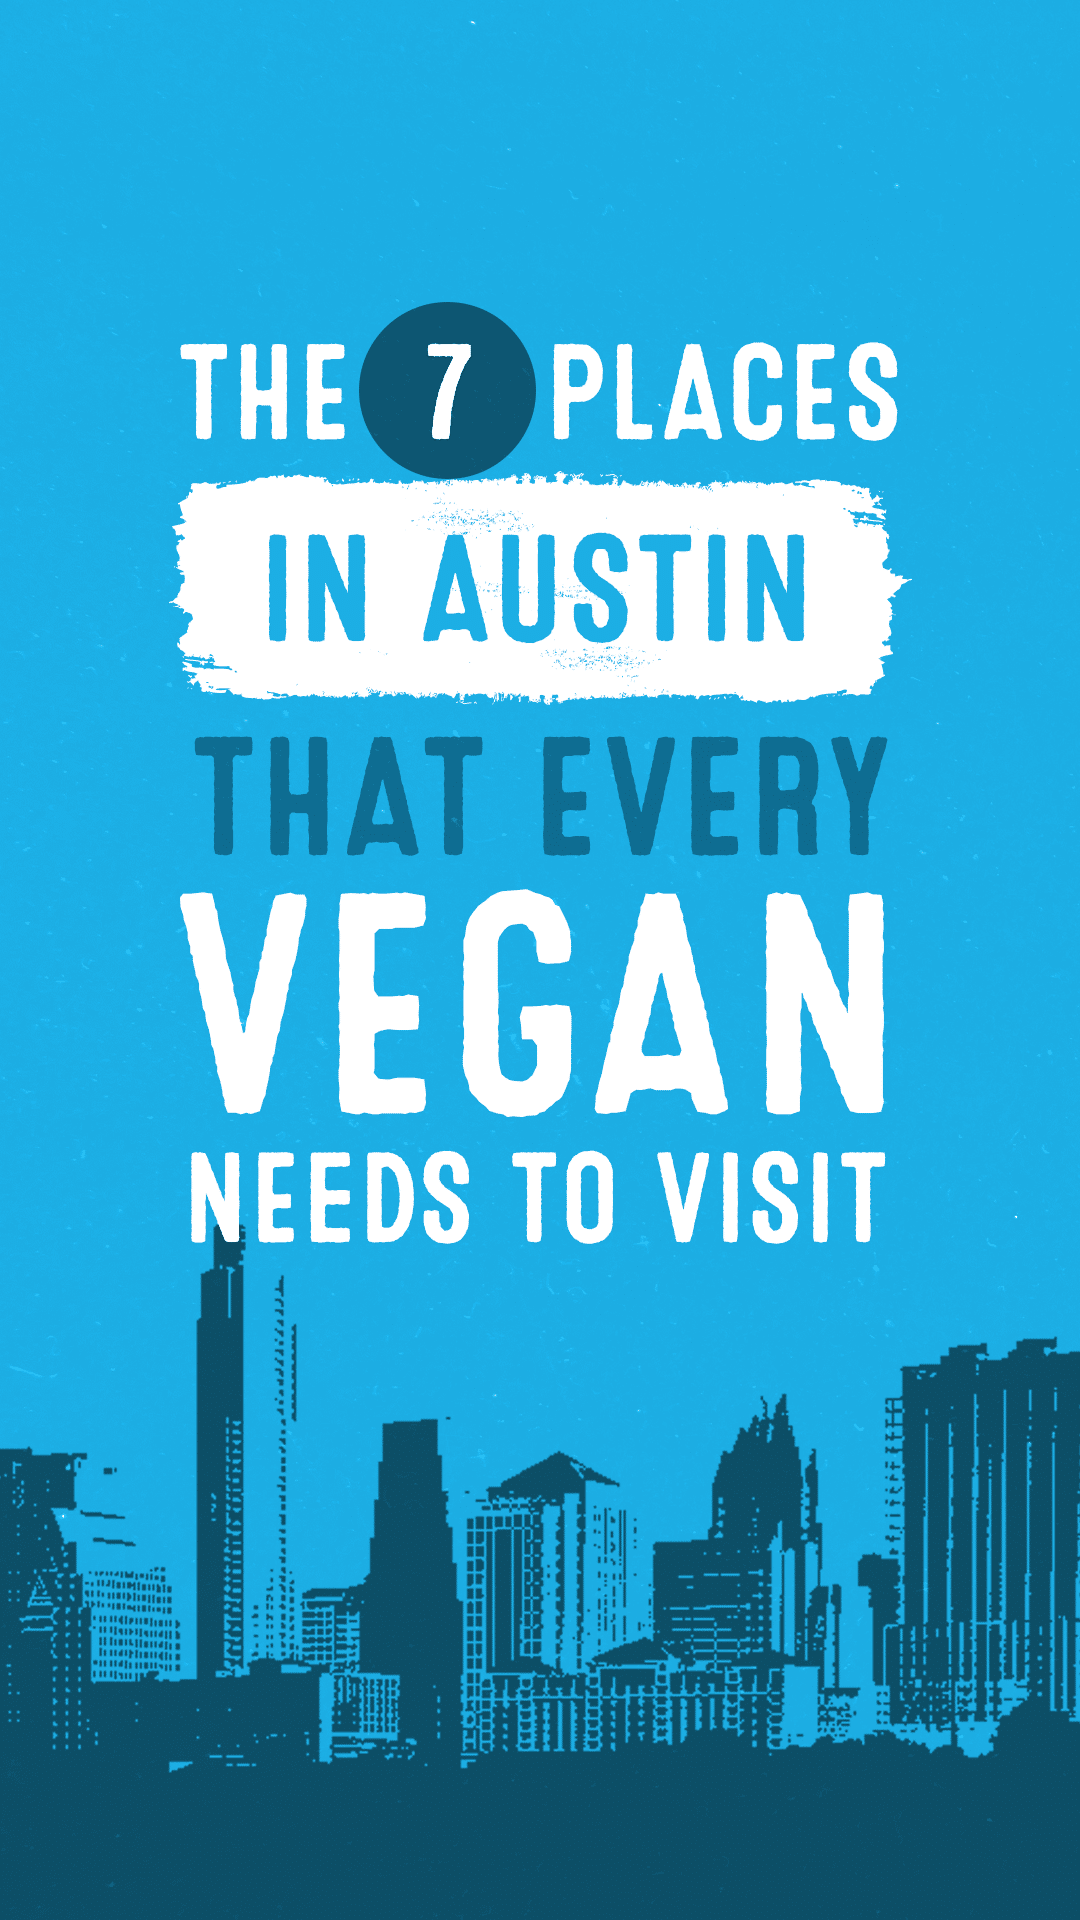 The 7 Places In Austin That Every Vegan Needs to Visit